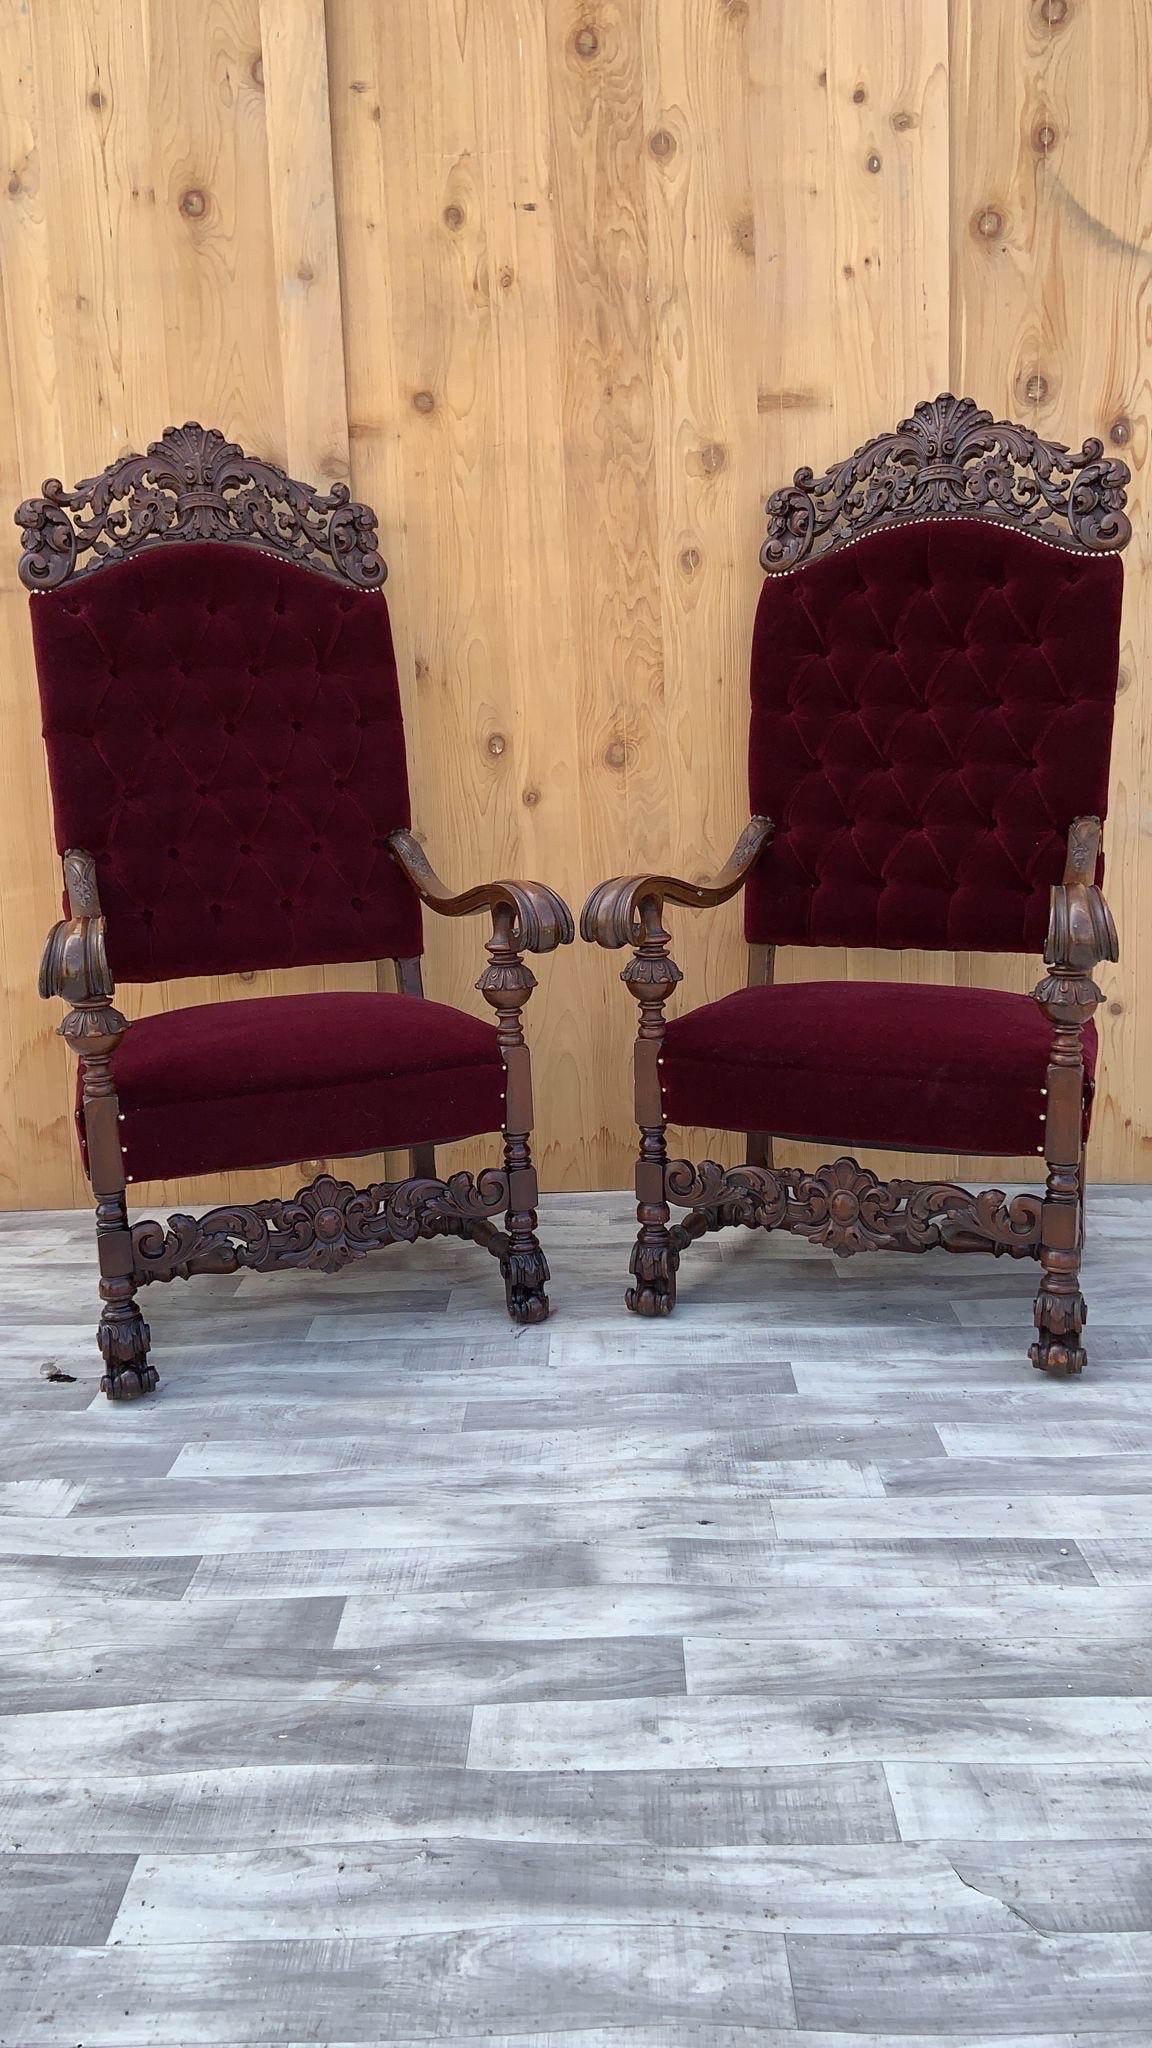 Antique French Regency Style Caved Walnut Throne Chairs Newly Upholstered, Pair For Sale 8